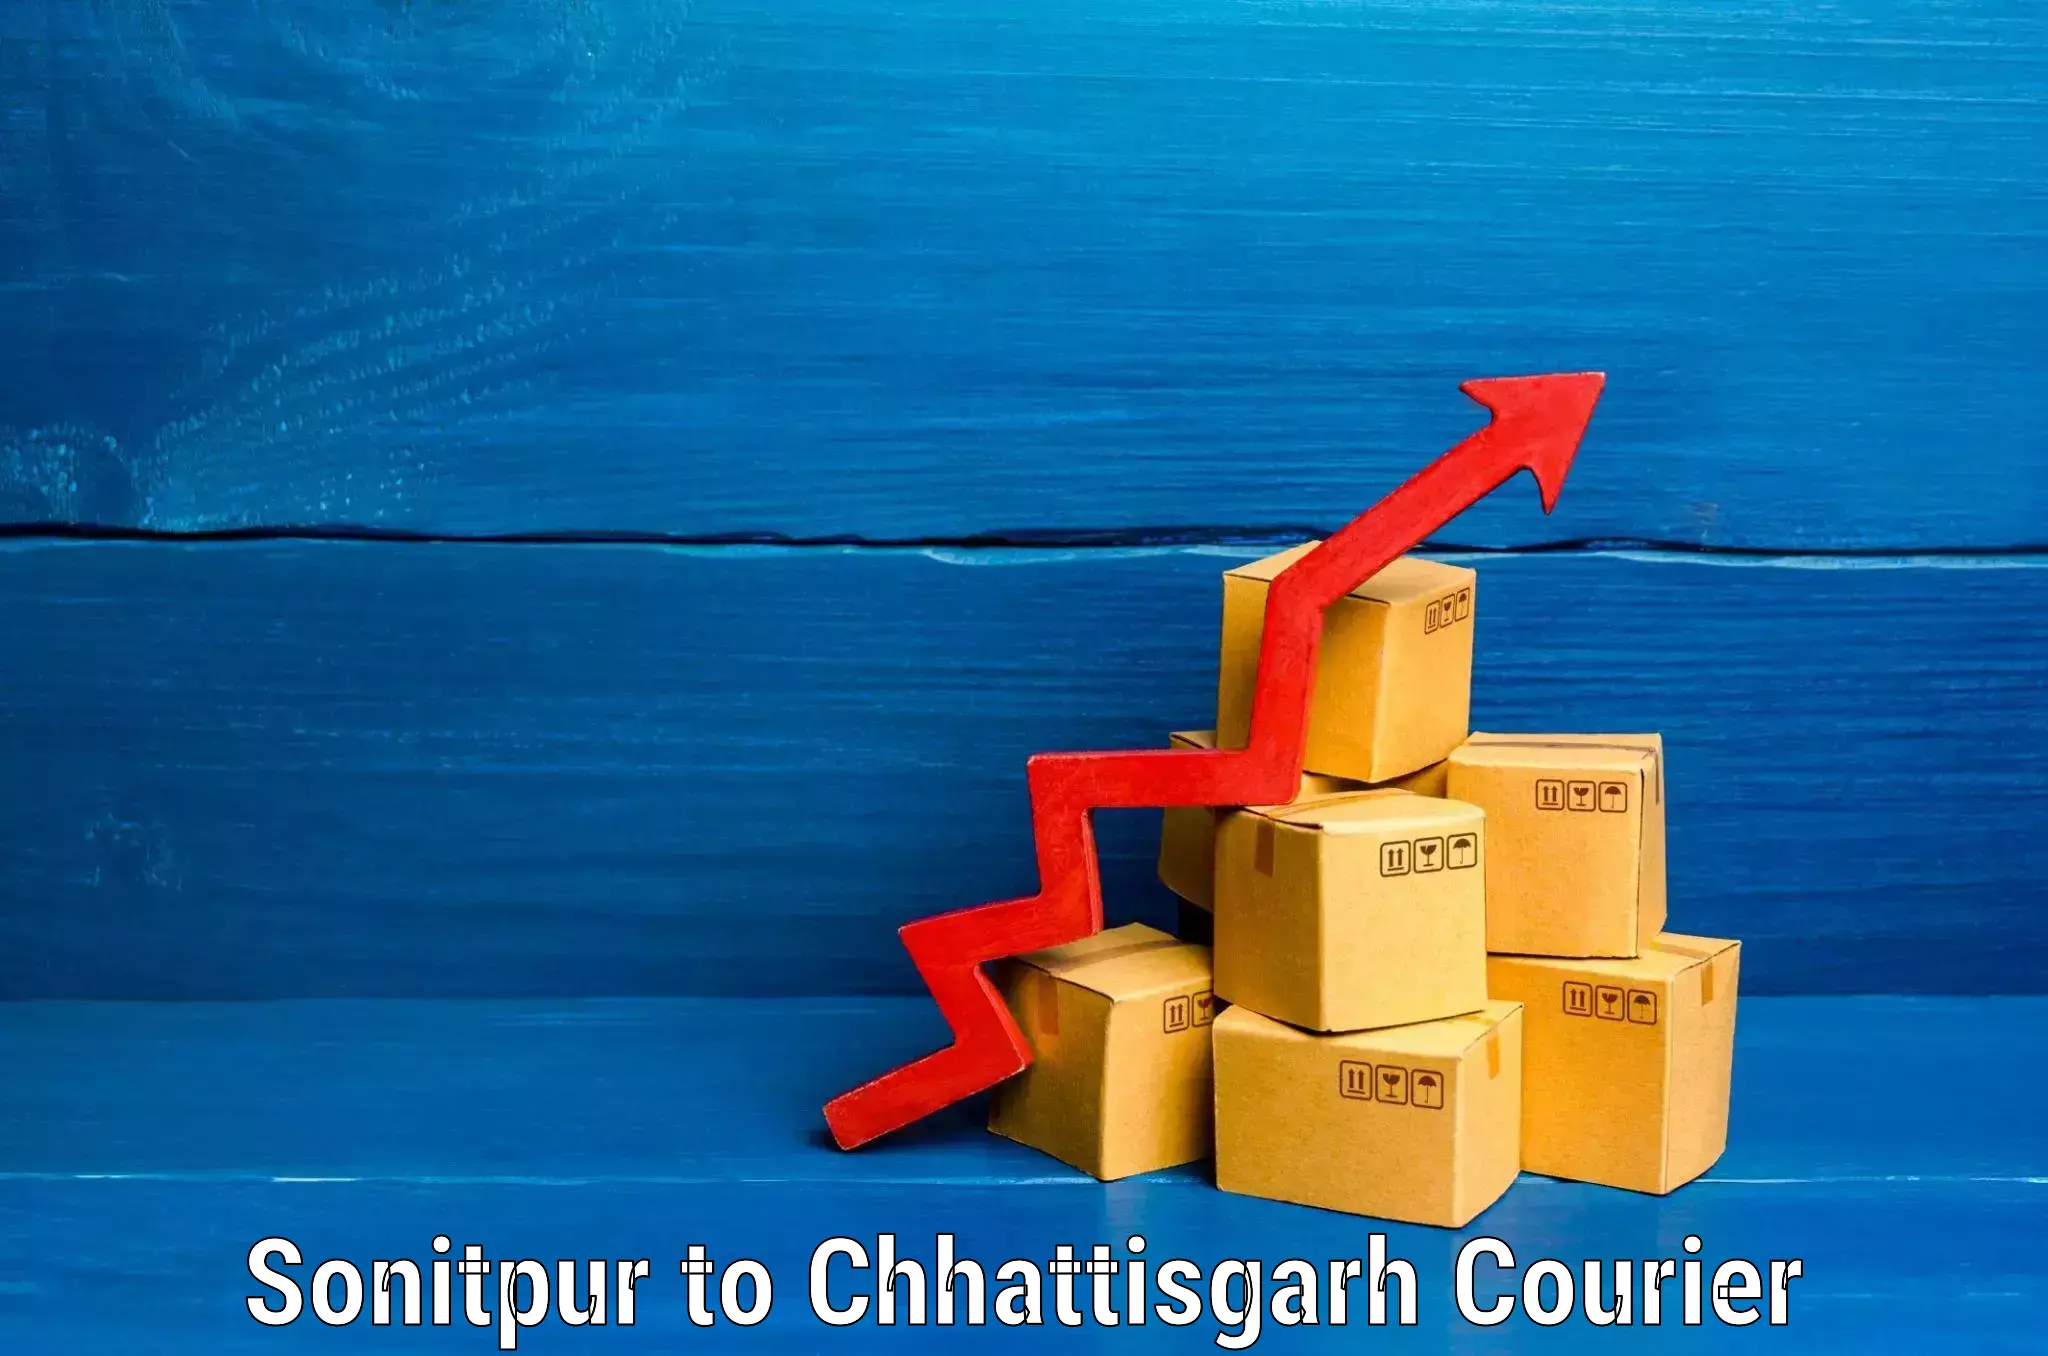 Hassle-free luggage shipping Sonitpur to Raigarh